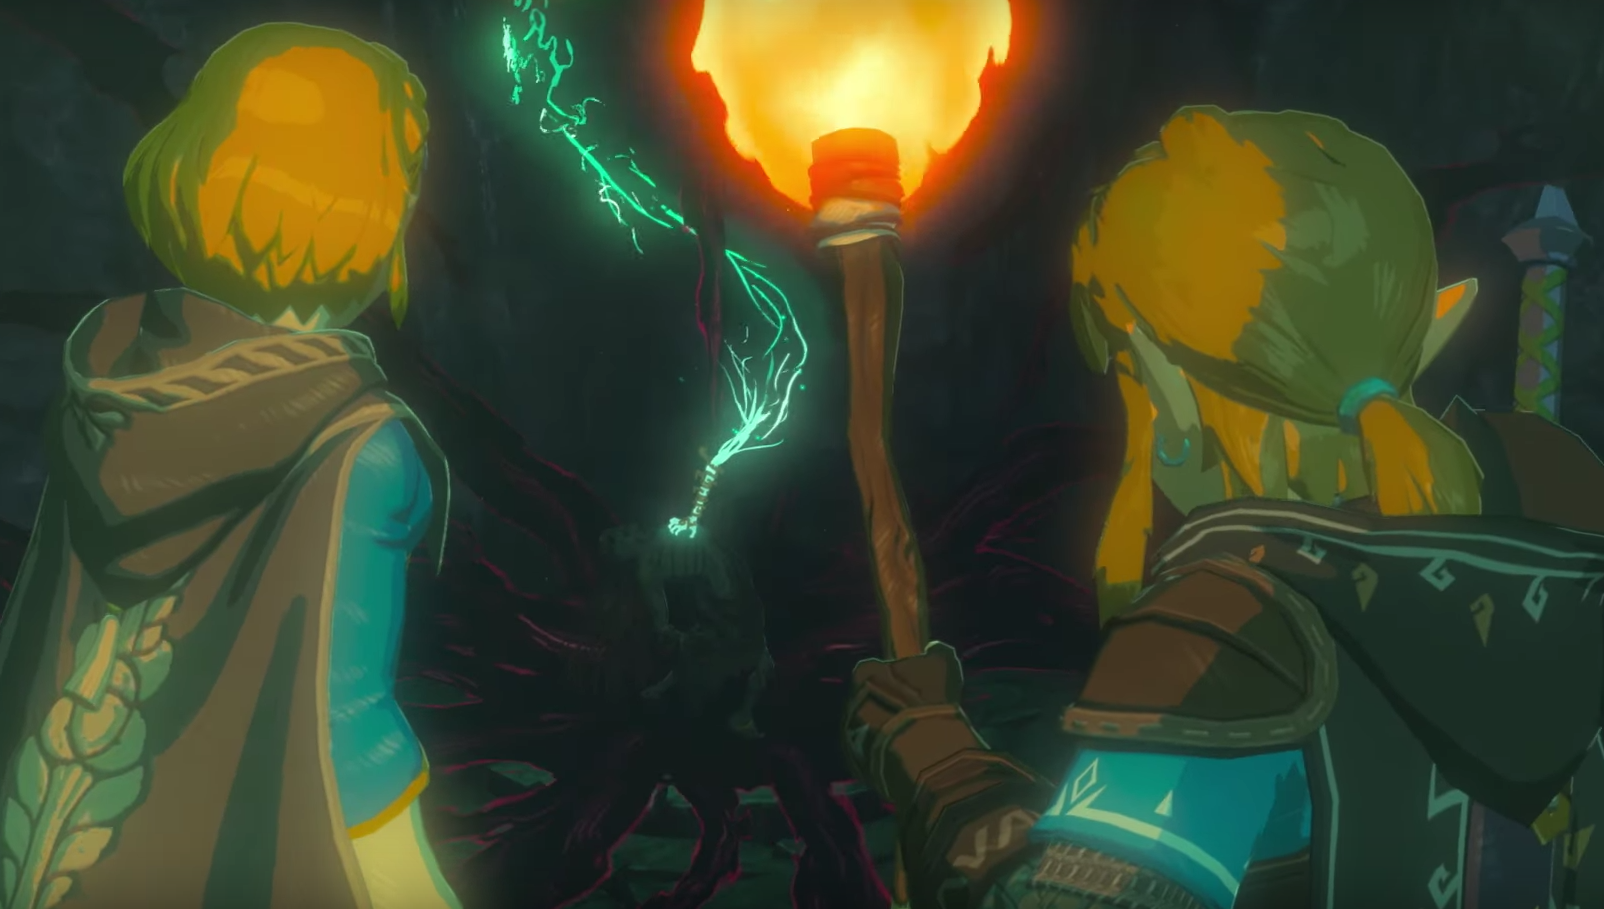 A BotW sequel is likely to be on everyone's Holiday wishlist